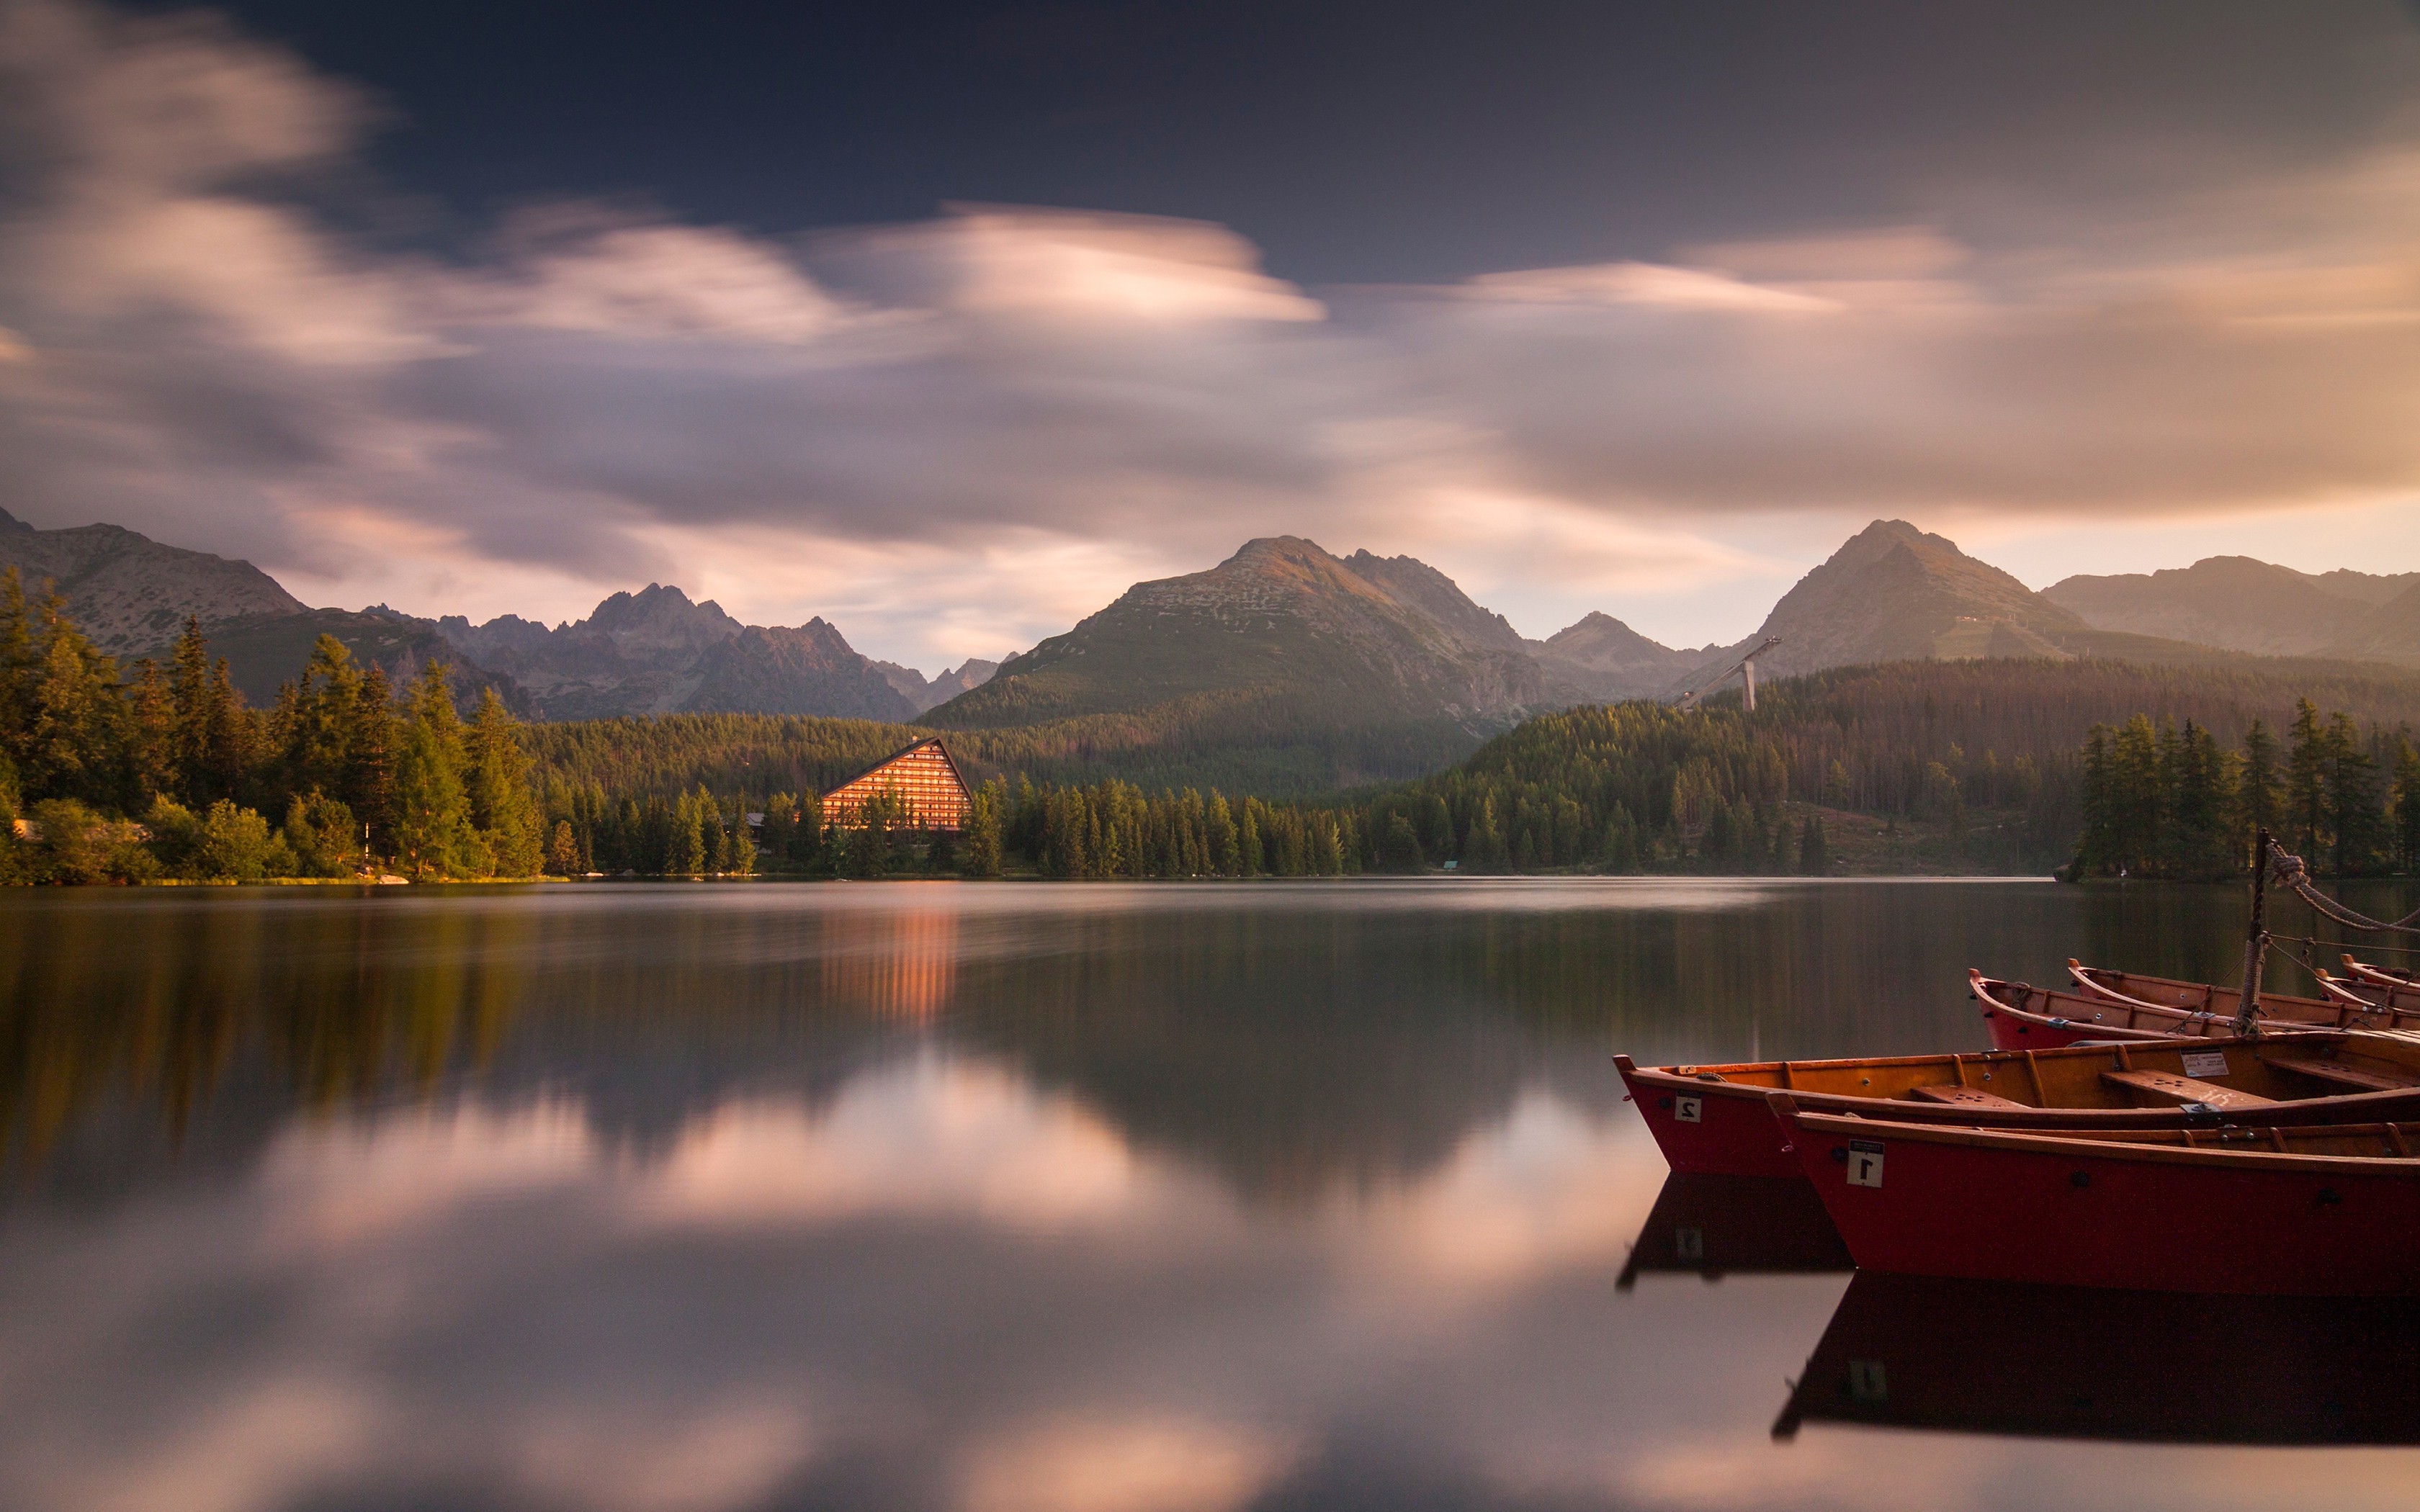 nature, Landscape, Mountain, Sunset, Lake, Forest, Boat, Calm, Clouds, Slovakia, Hotels Wallpaper HD / Desktop and Mobile Background